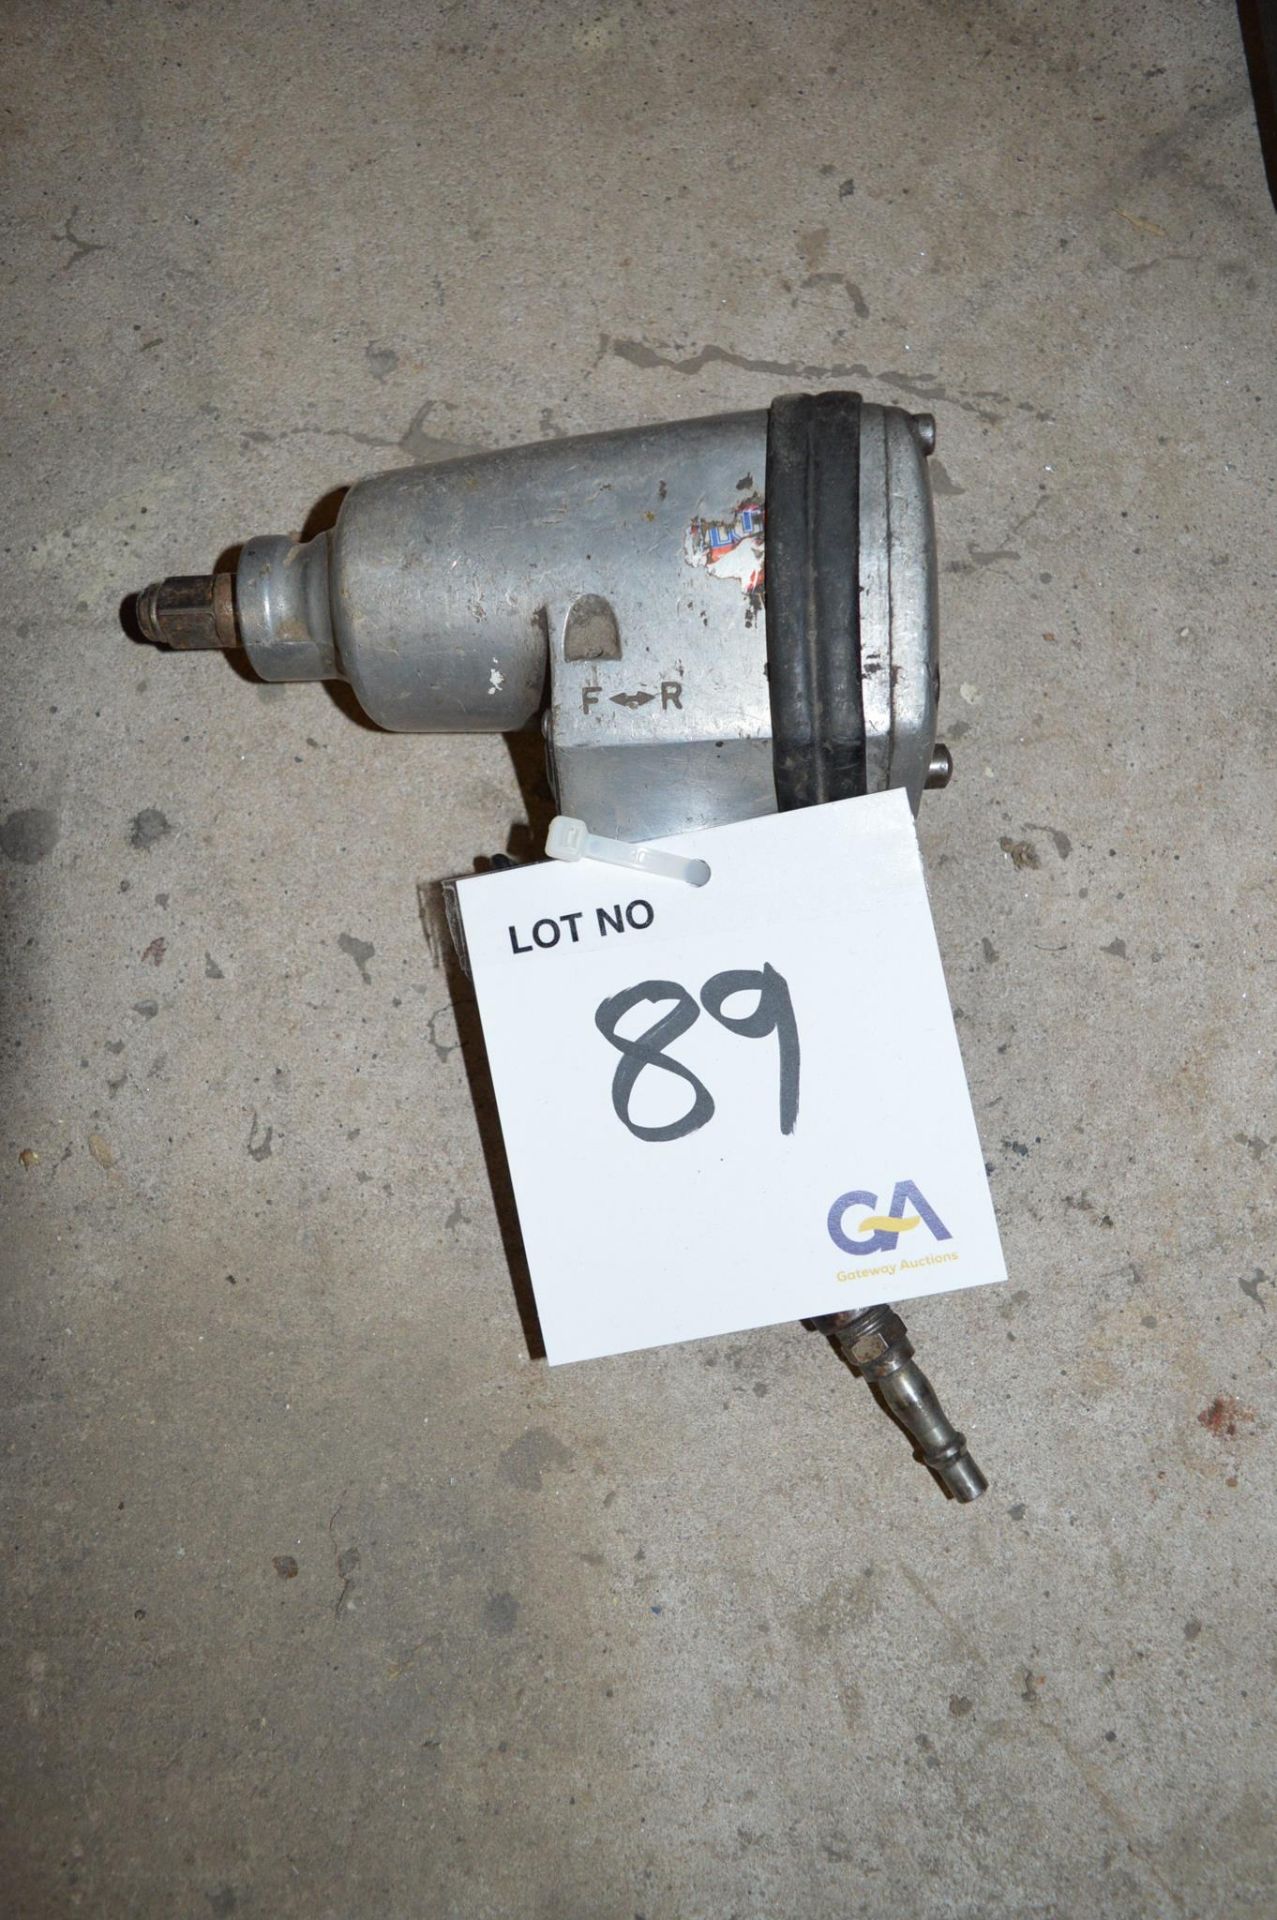 1/2" pneumatic impact wrench ** No VAT on hammer price but VAT will be charged on the buyer's